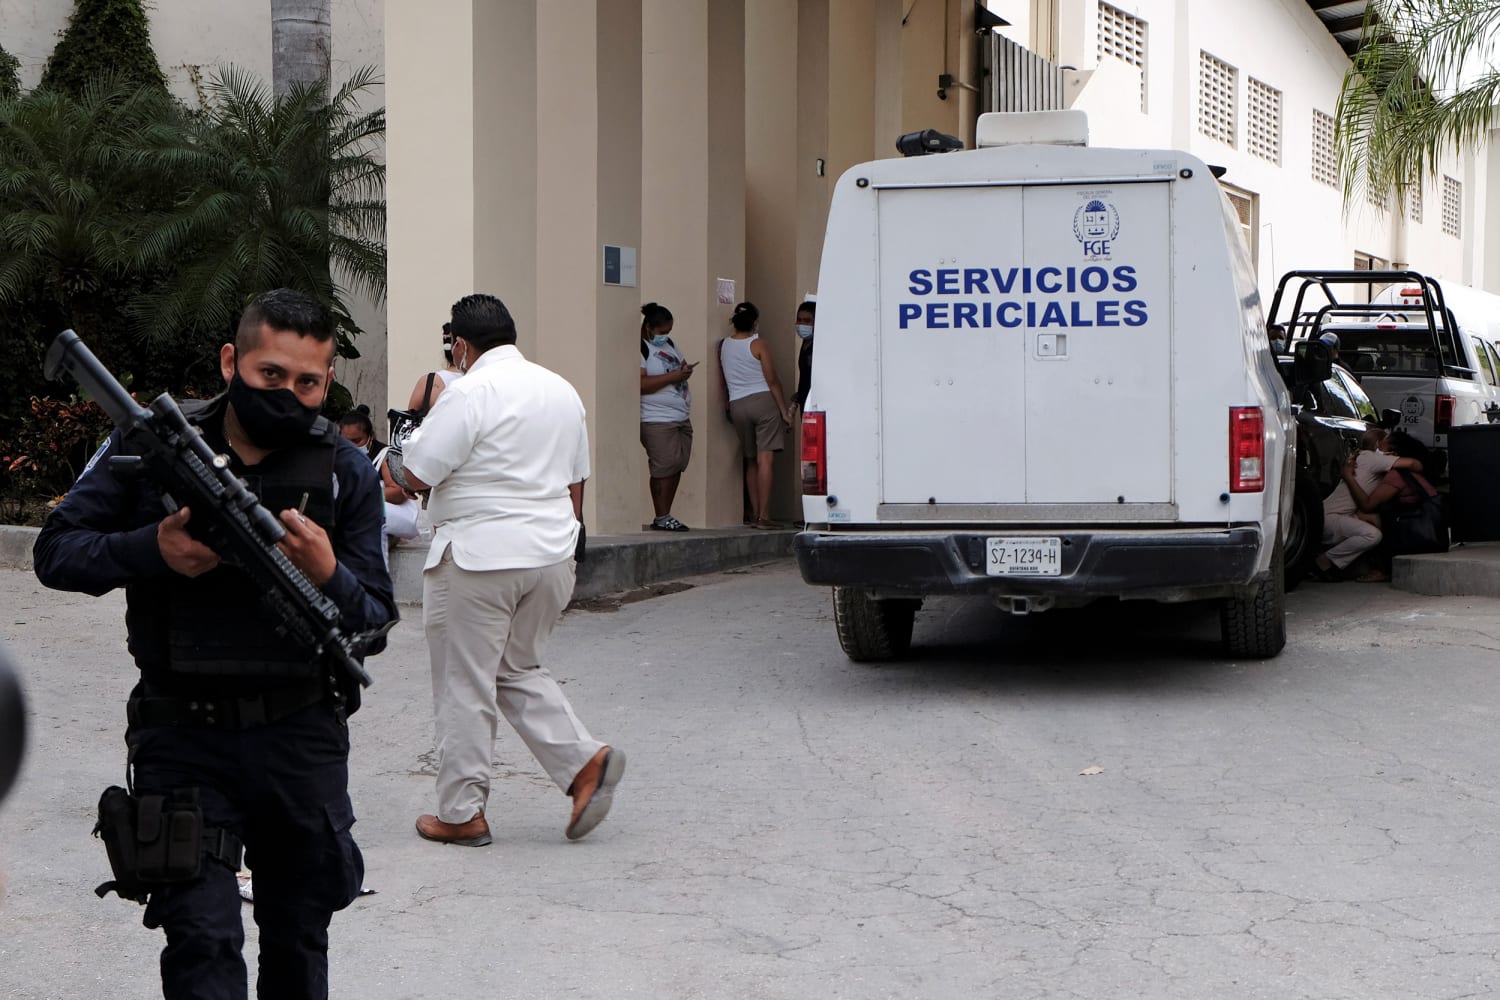 2 suspects dead after reported shooting at Cancun Hyatt hotel